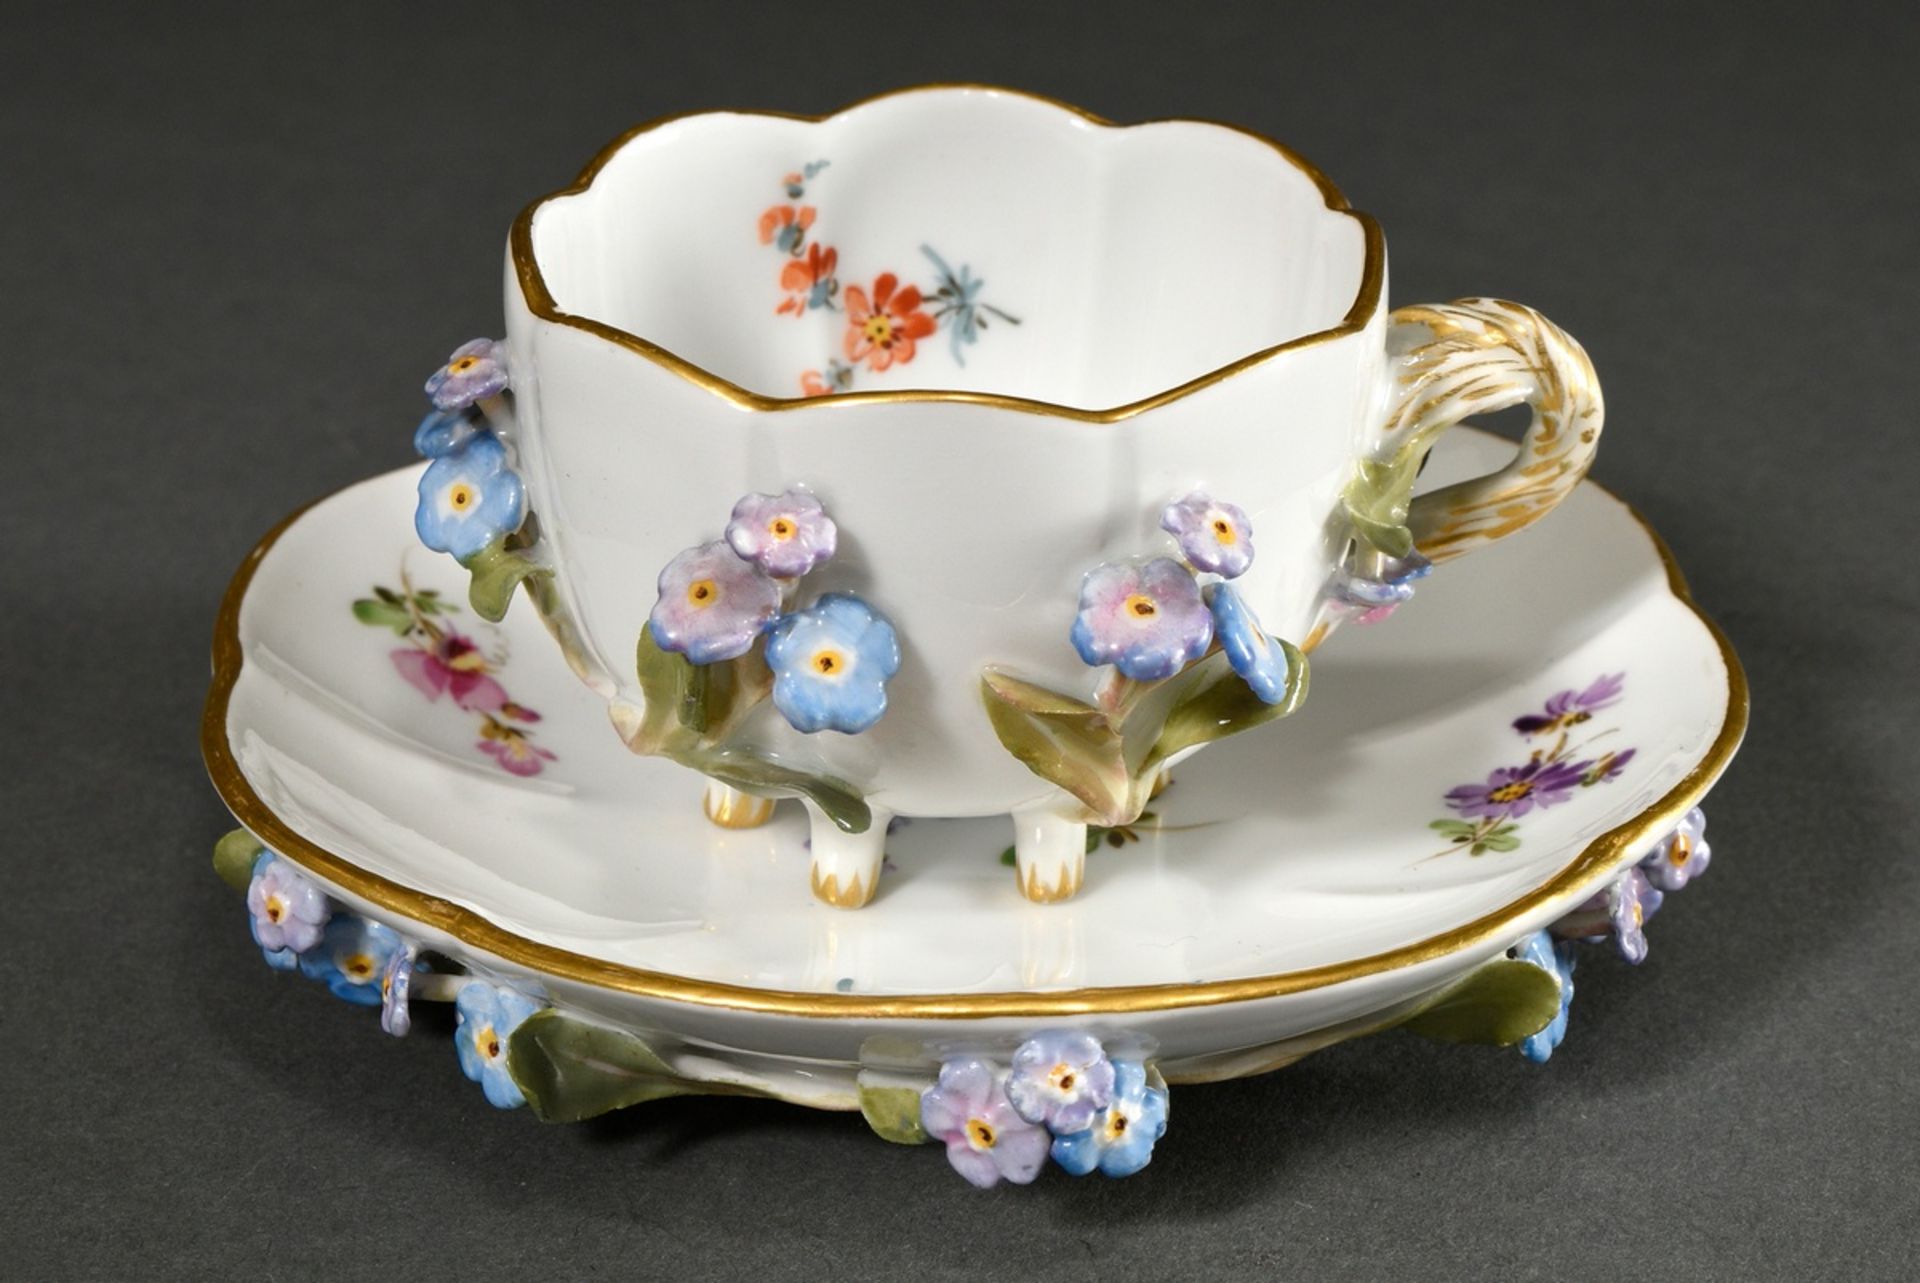 3 Pieces Meissen: Mocha cup/ saucer with relief flowers (h. 4cm, 1 blossom chip.) and 2 Trembleuse  - Image 7 of 8